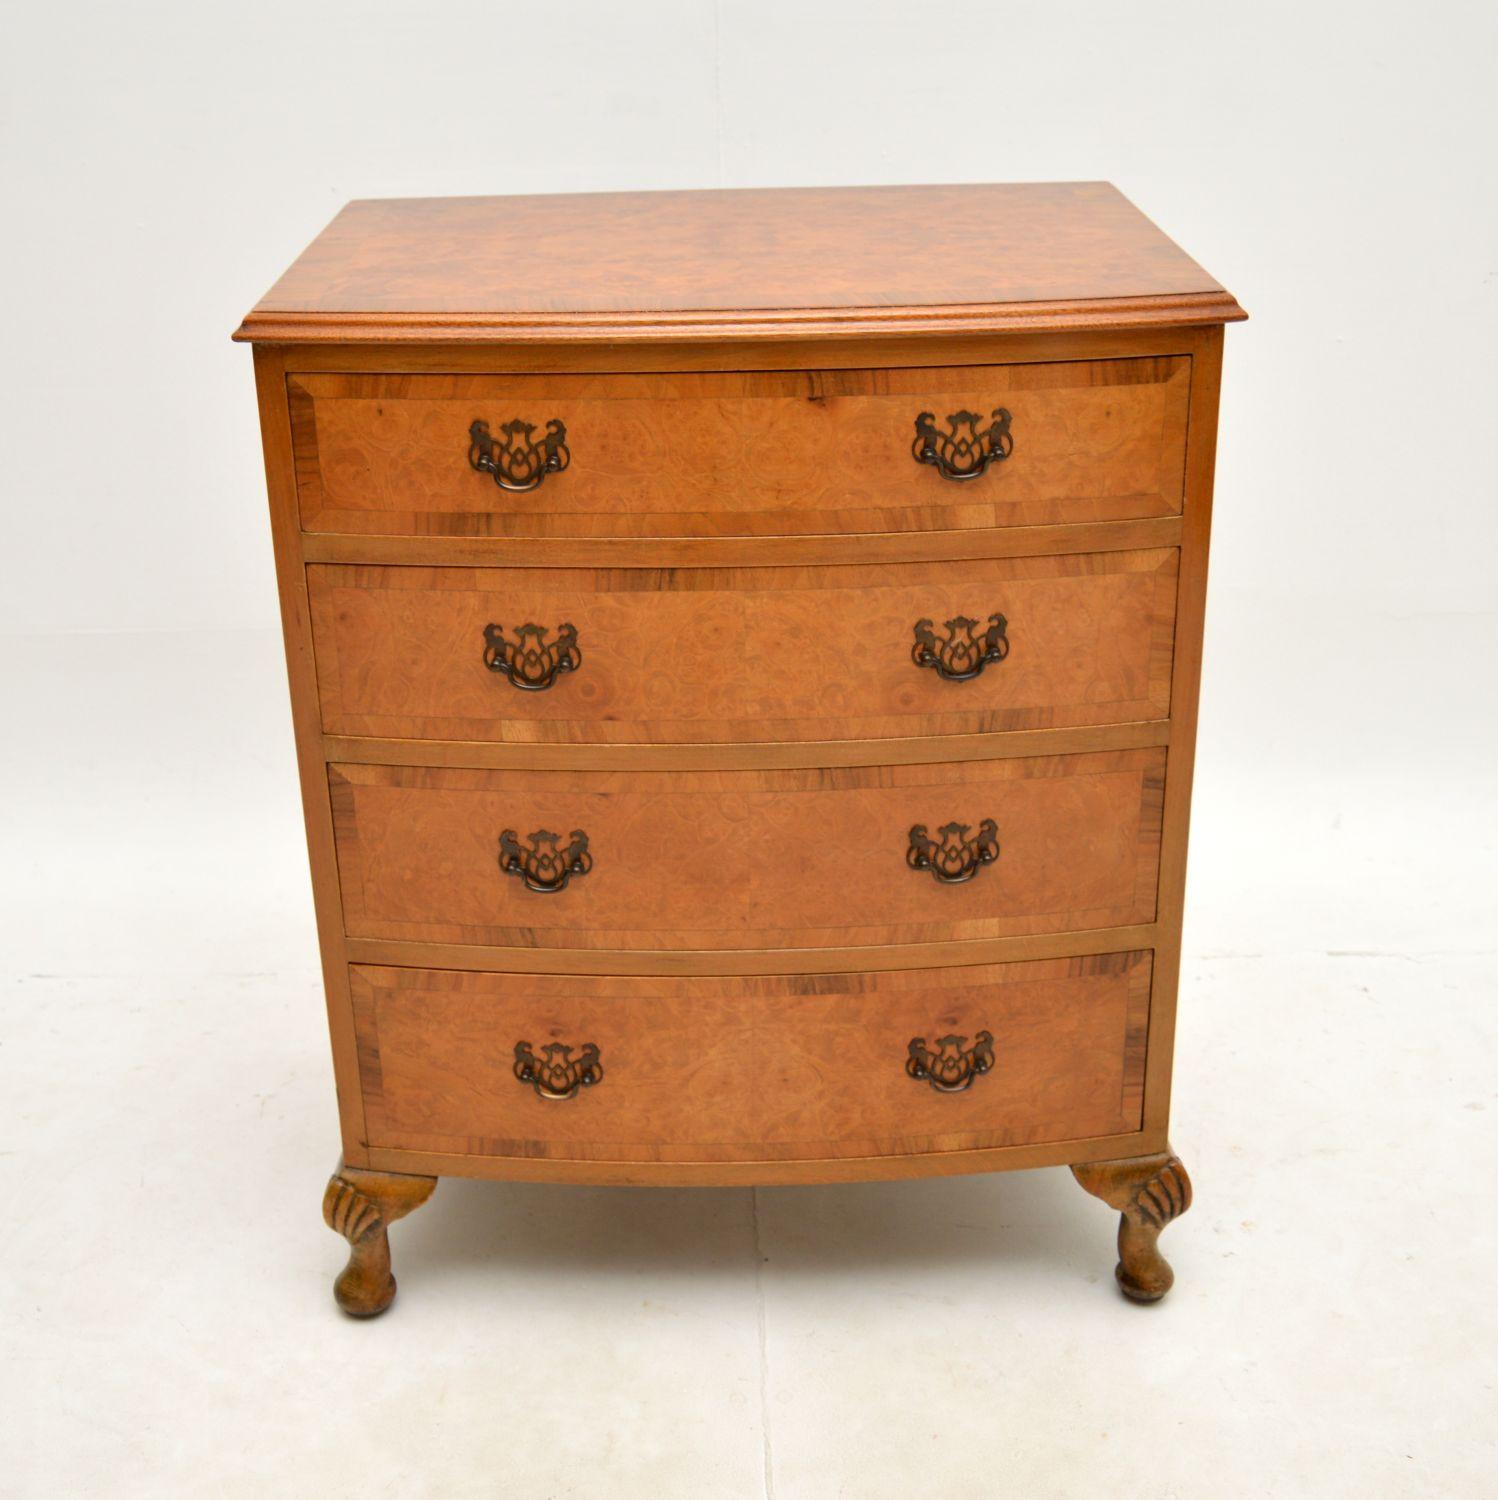 A smart and very well made antique burr walnut bow front chest of drawers. This was made in England, it dates from around the 1930’s.

The quality is superb, this is a useful size with plenty of storage space. The top and drawers fronts have cross